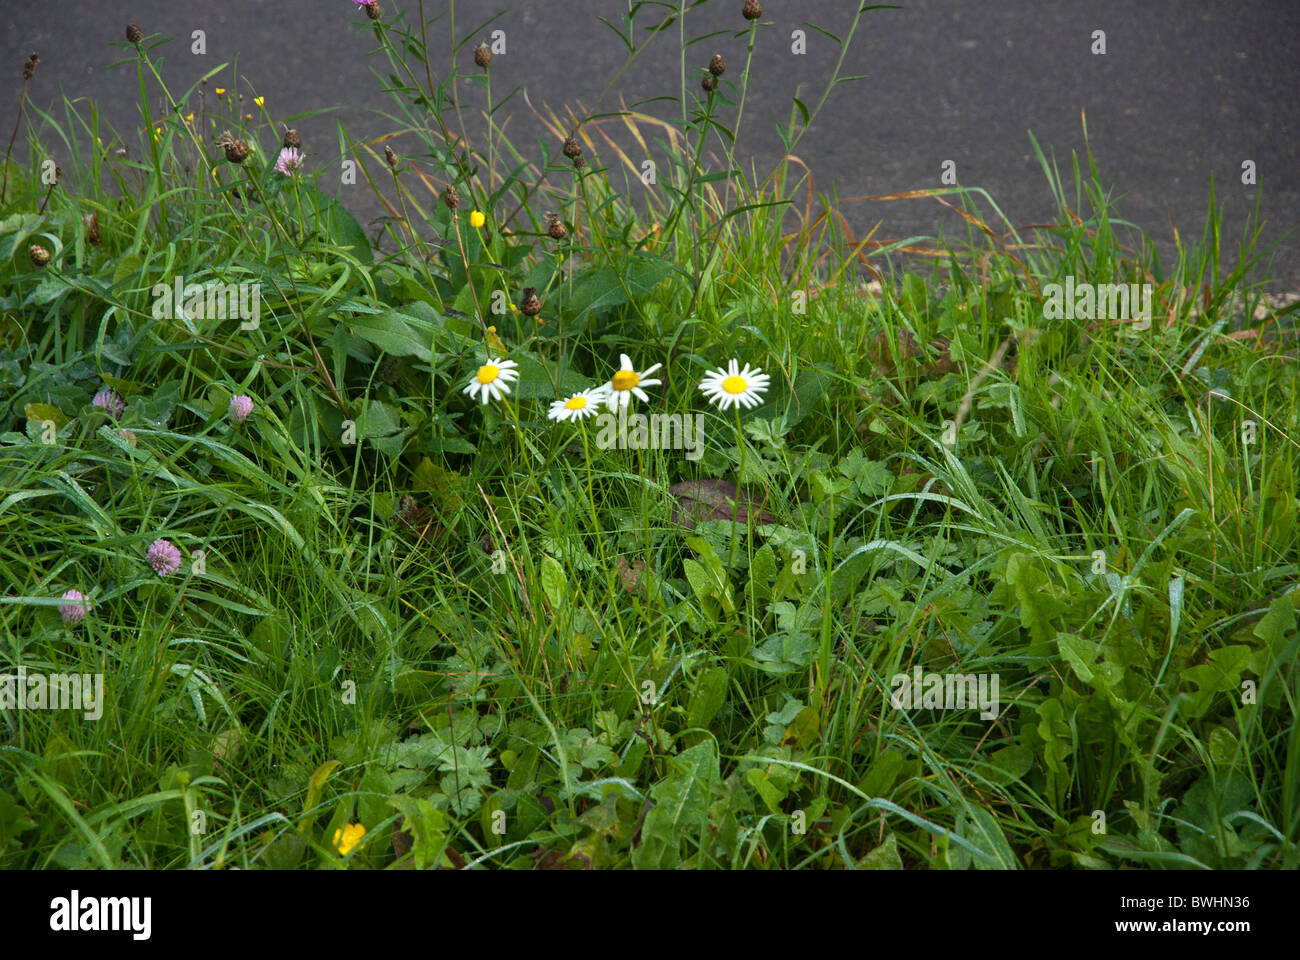 Roadside verge with daisies and wildflowers Stock Photo